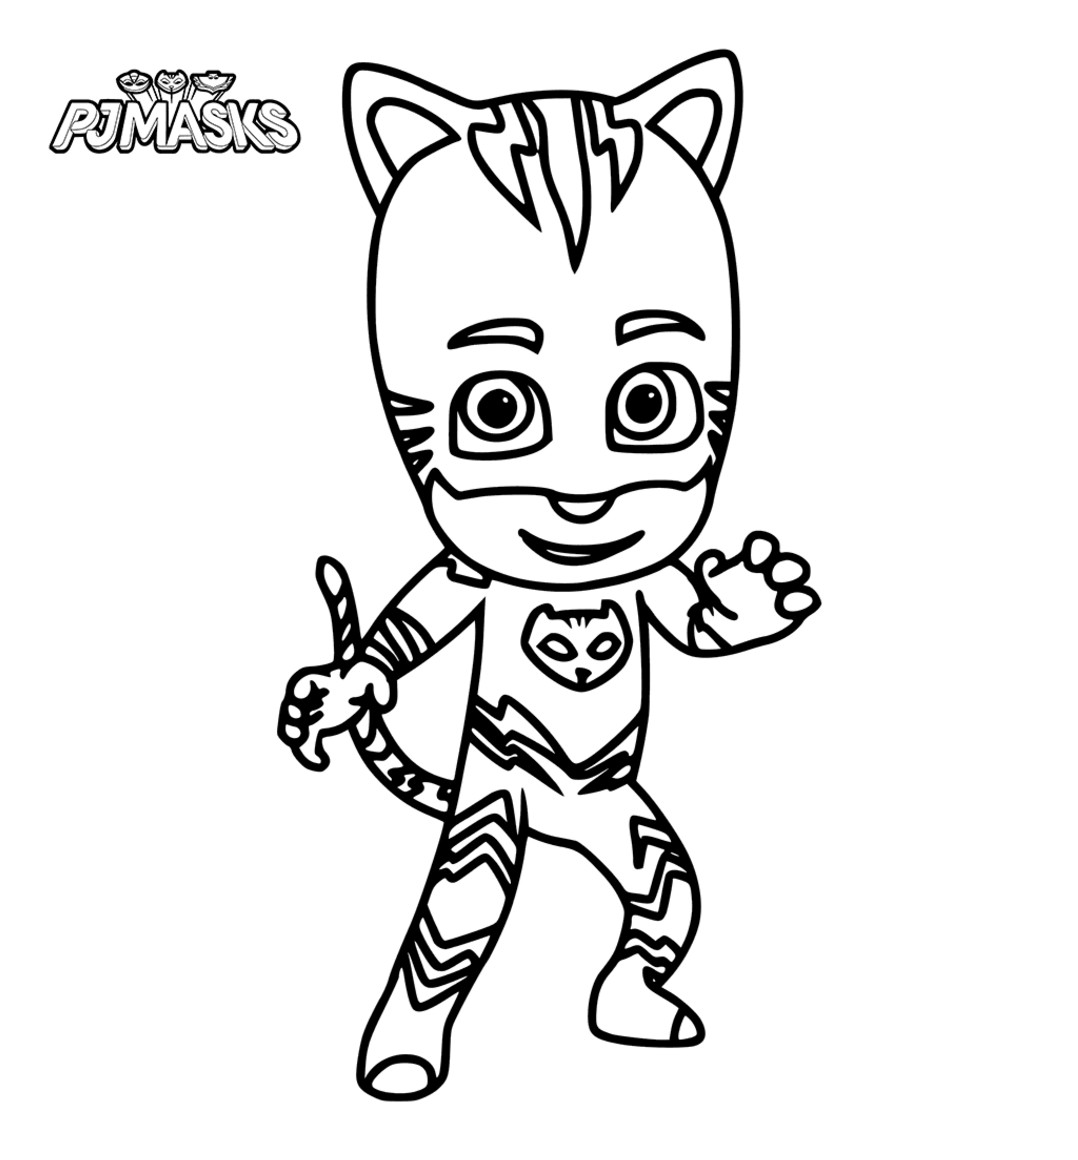 Free Coloring Sheets For Boys Pj Mask
 pj masks catboy coloring pages free